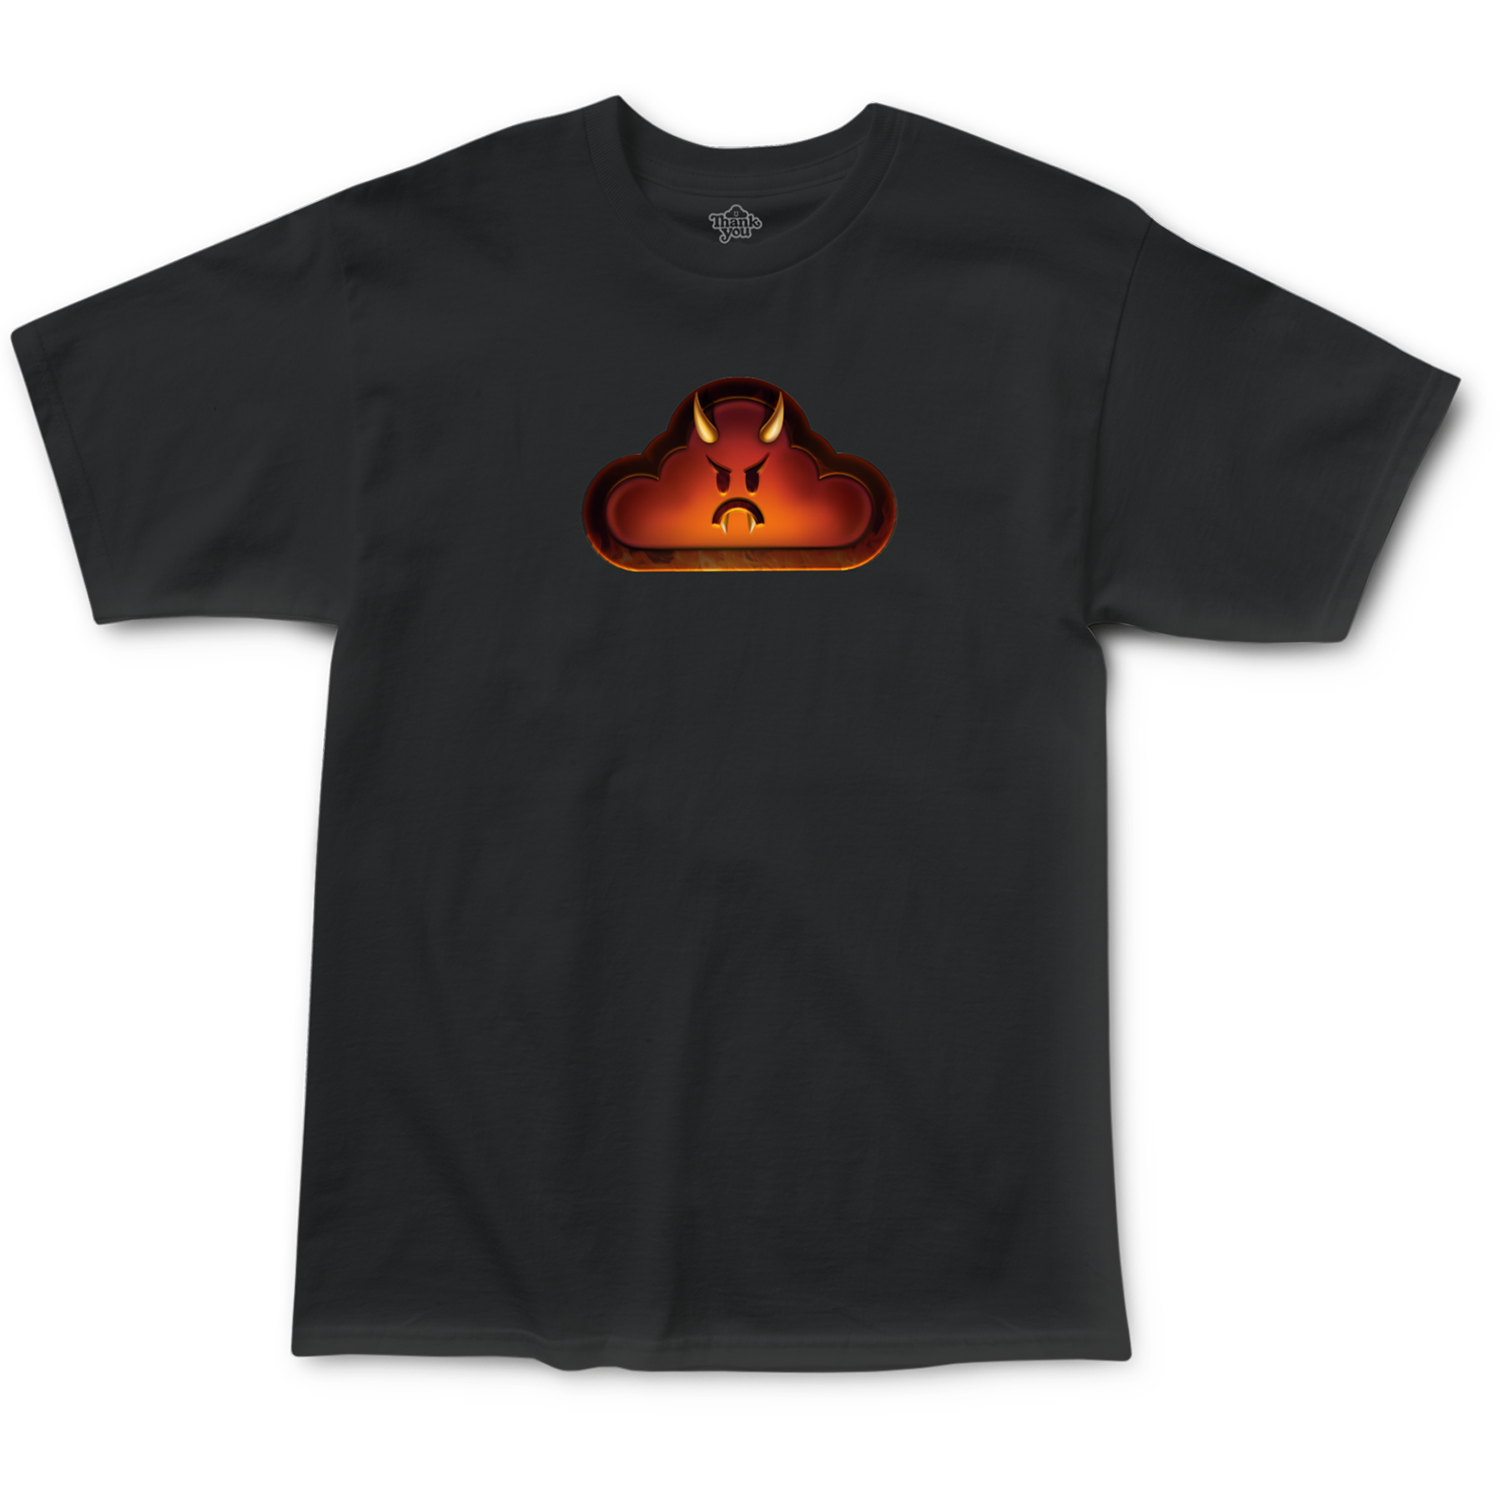 Thank You Flame On T-Shirt - Black